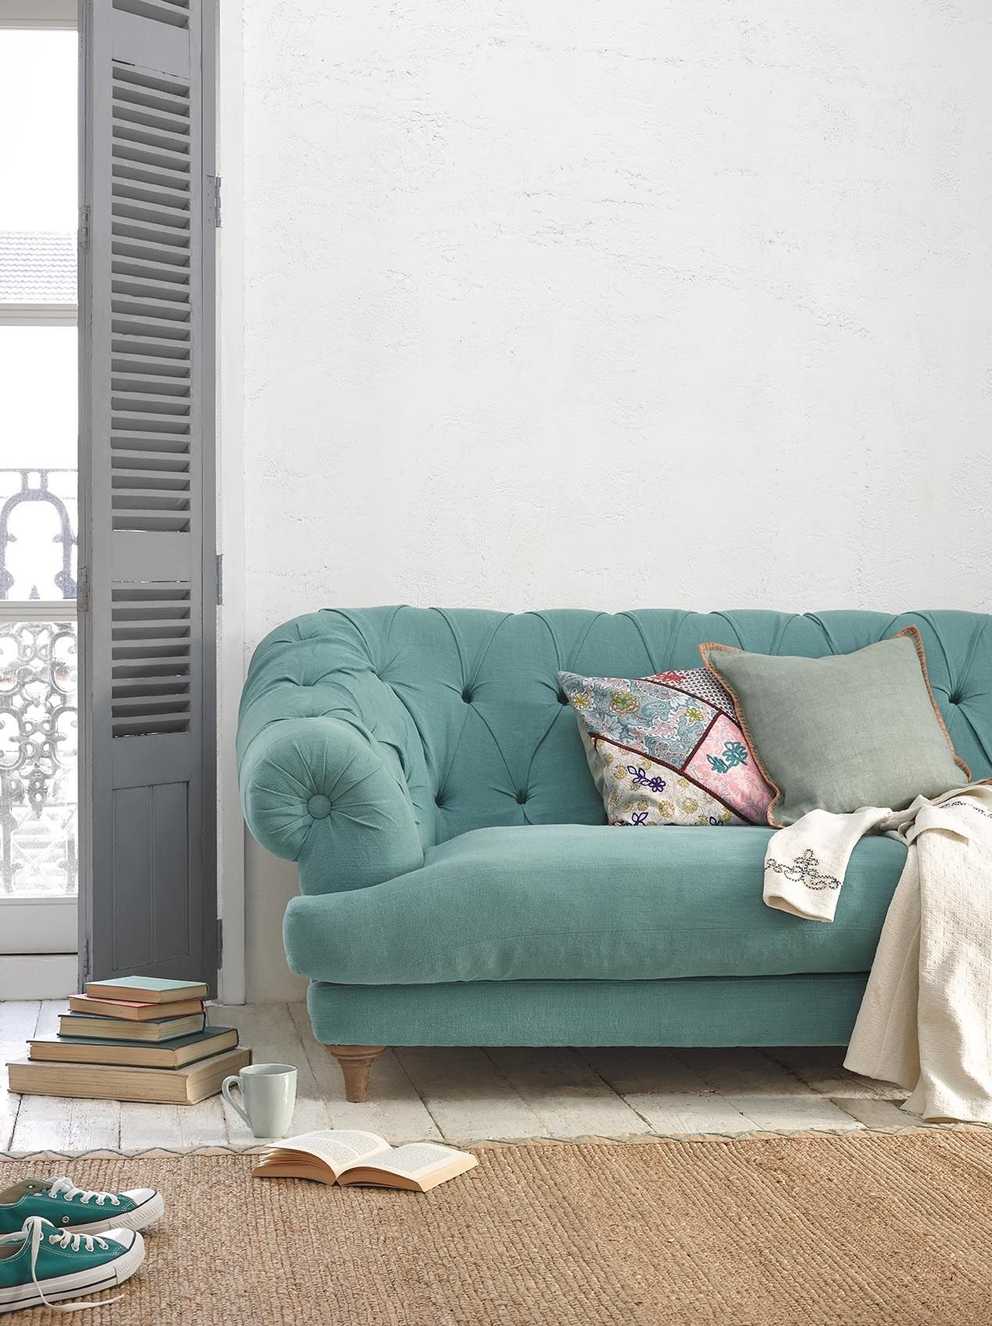 Bagsie Sofa | Chesterfield Style Sofa | Loaf Within Aqua Sofas (Photo 2 of 10)